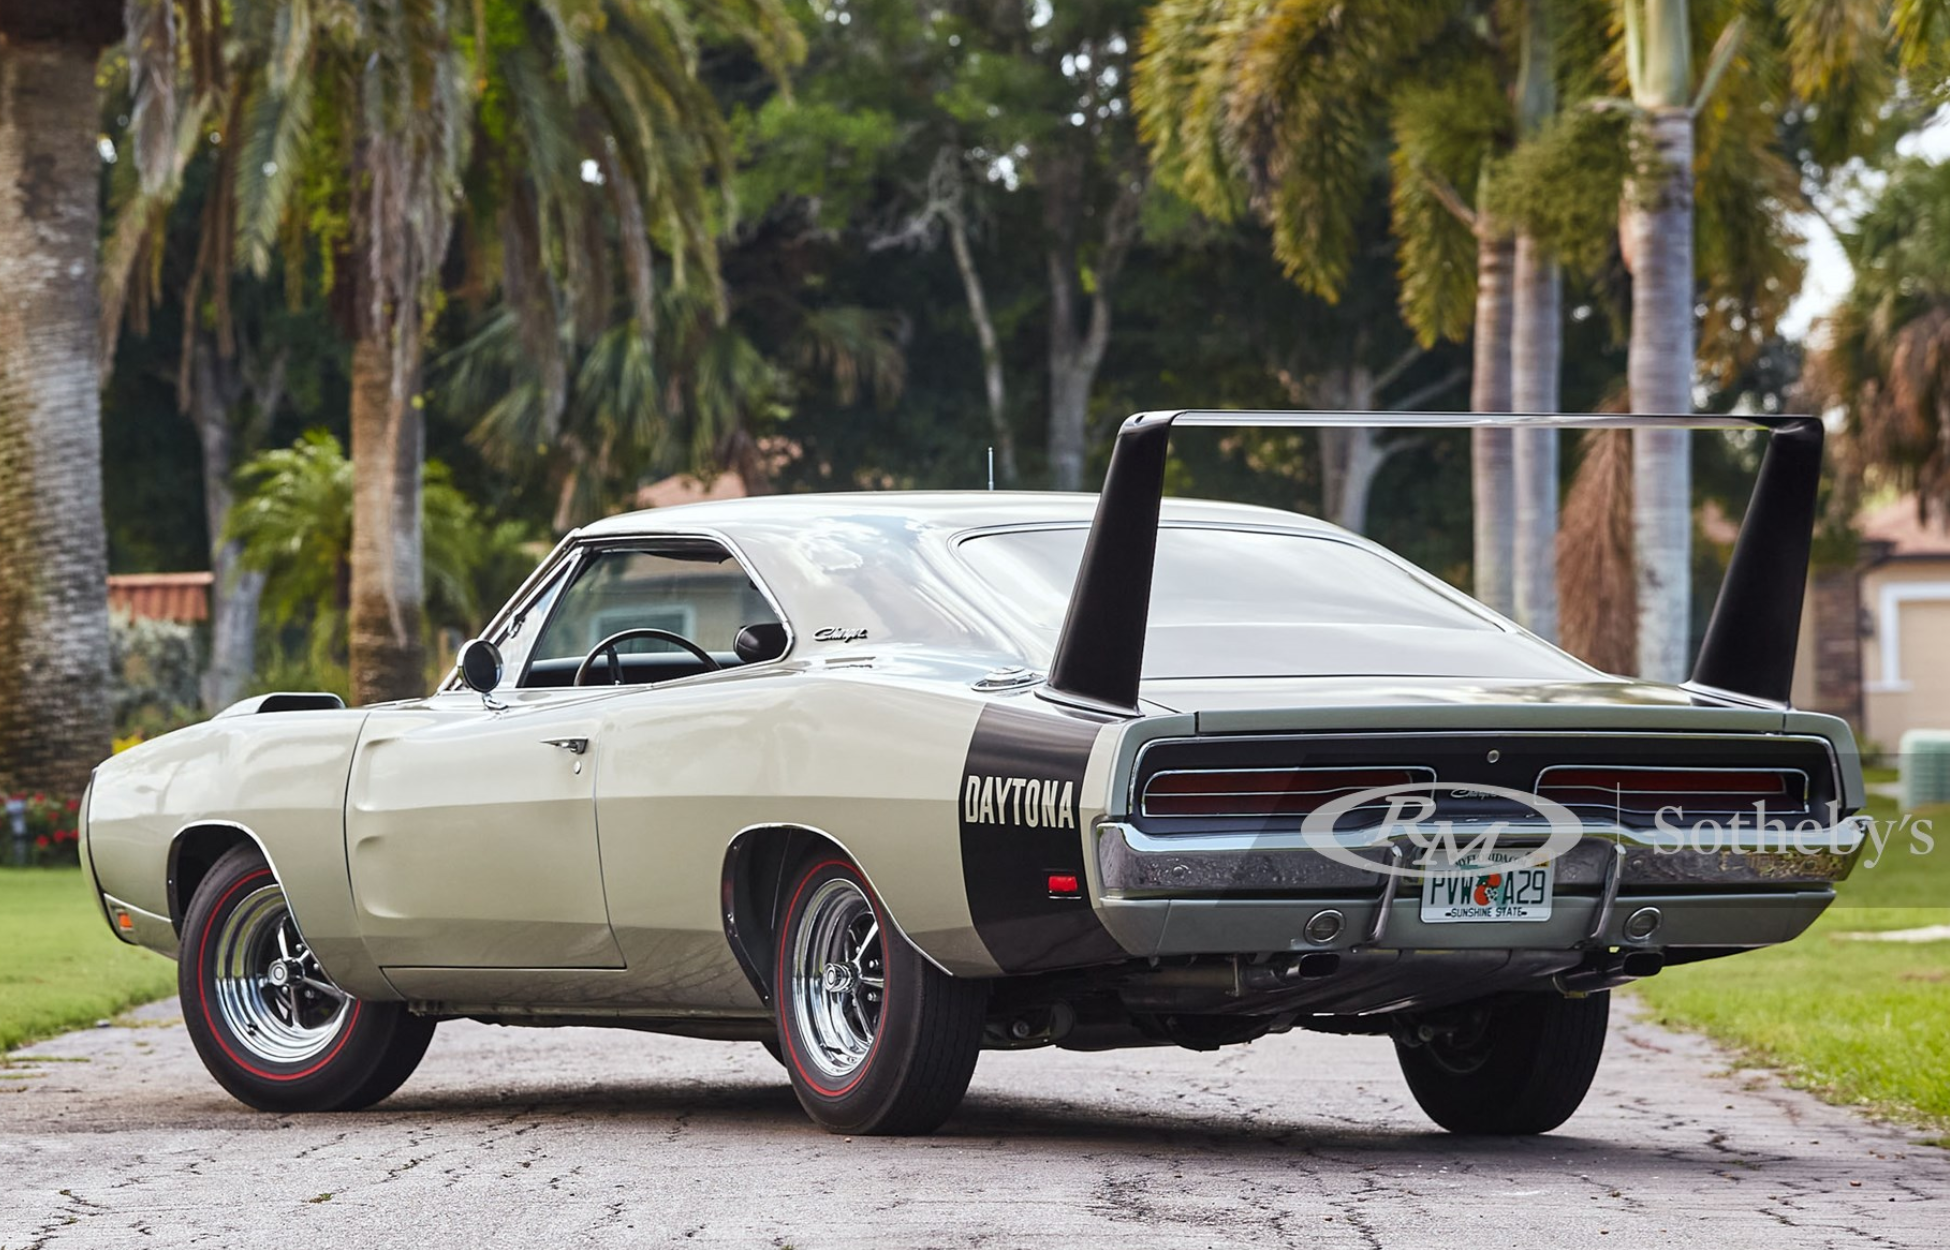 1969 Dodge Charger Daytona: A Legend On And Off The Track